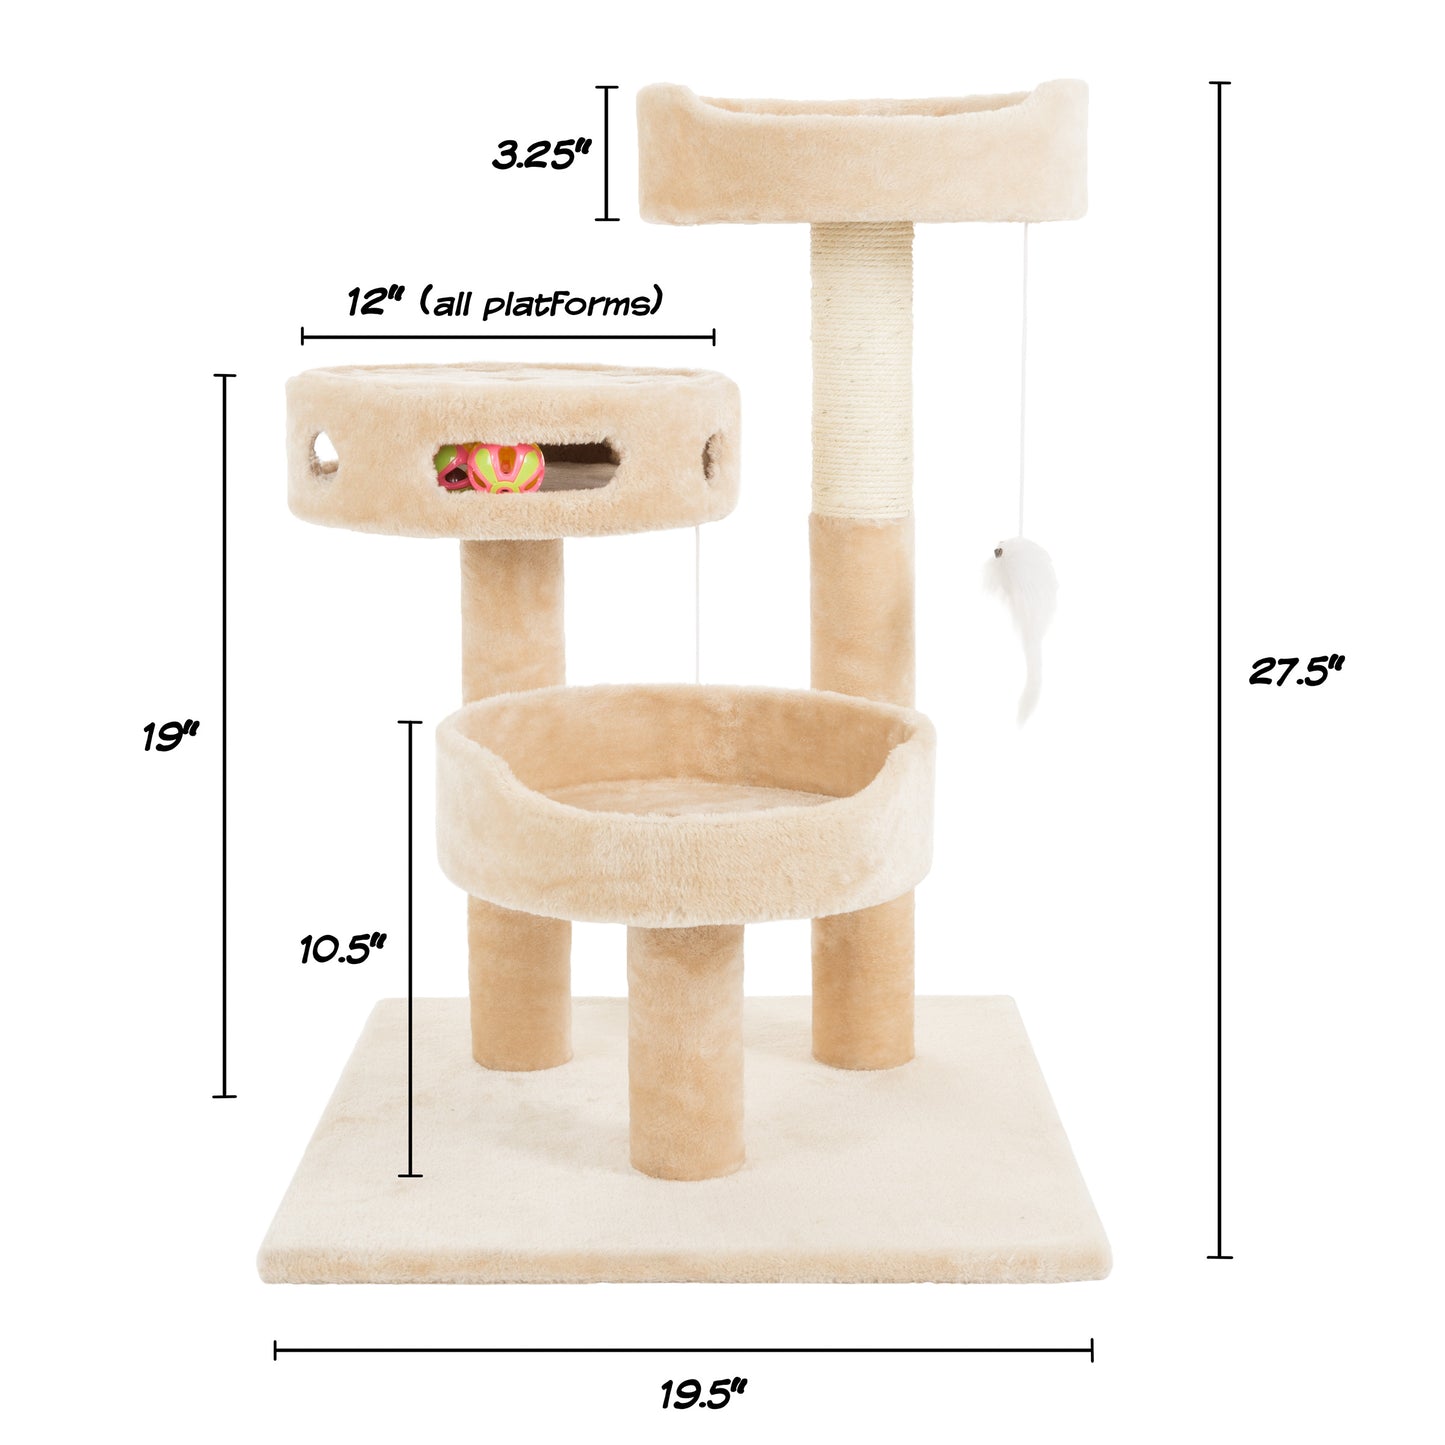 PETMAKER Cat Tree with Interactive Cheese Wheel